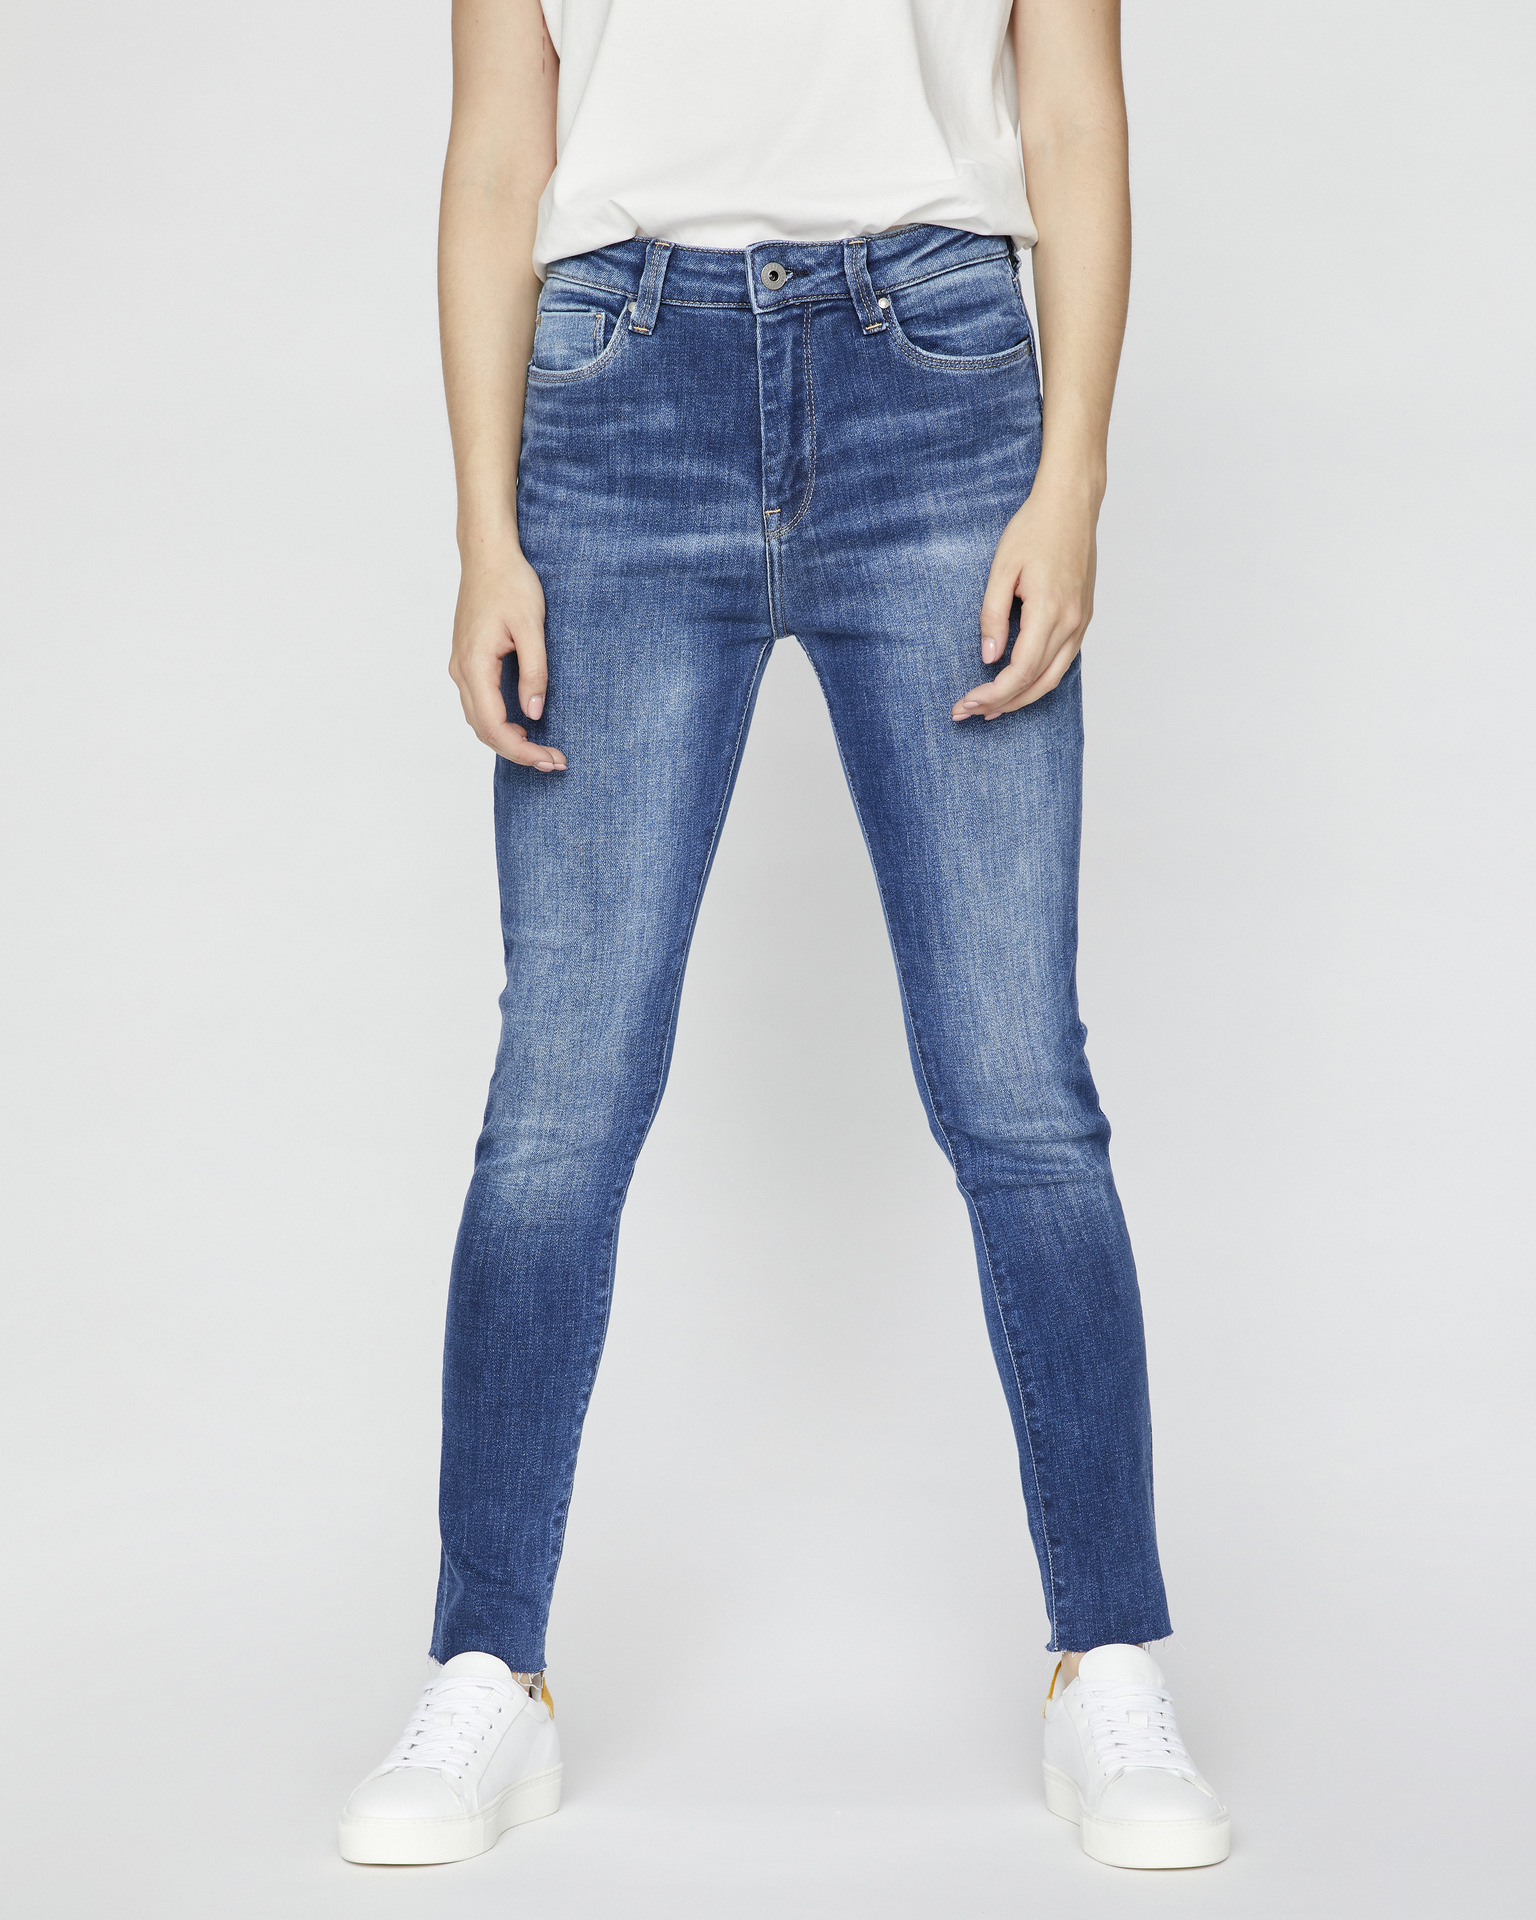 Pepe Jeans - Dion Jeans